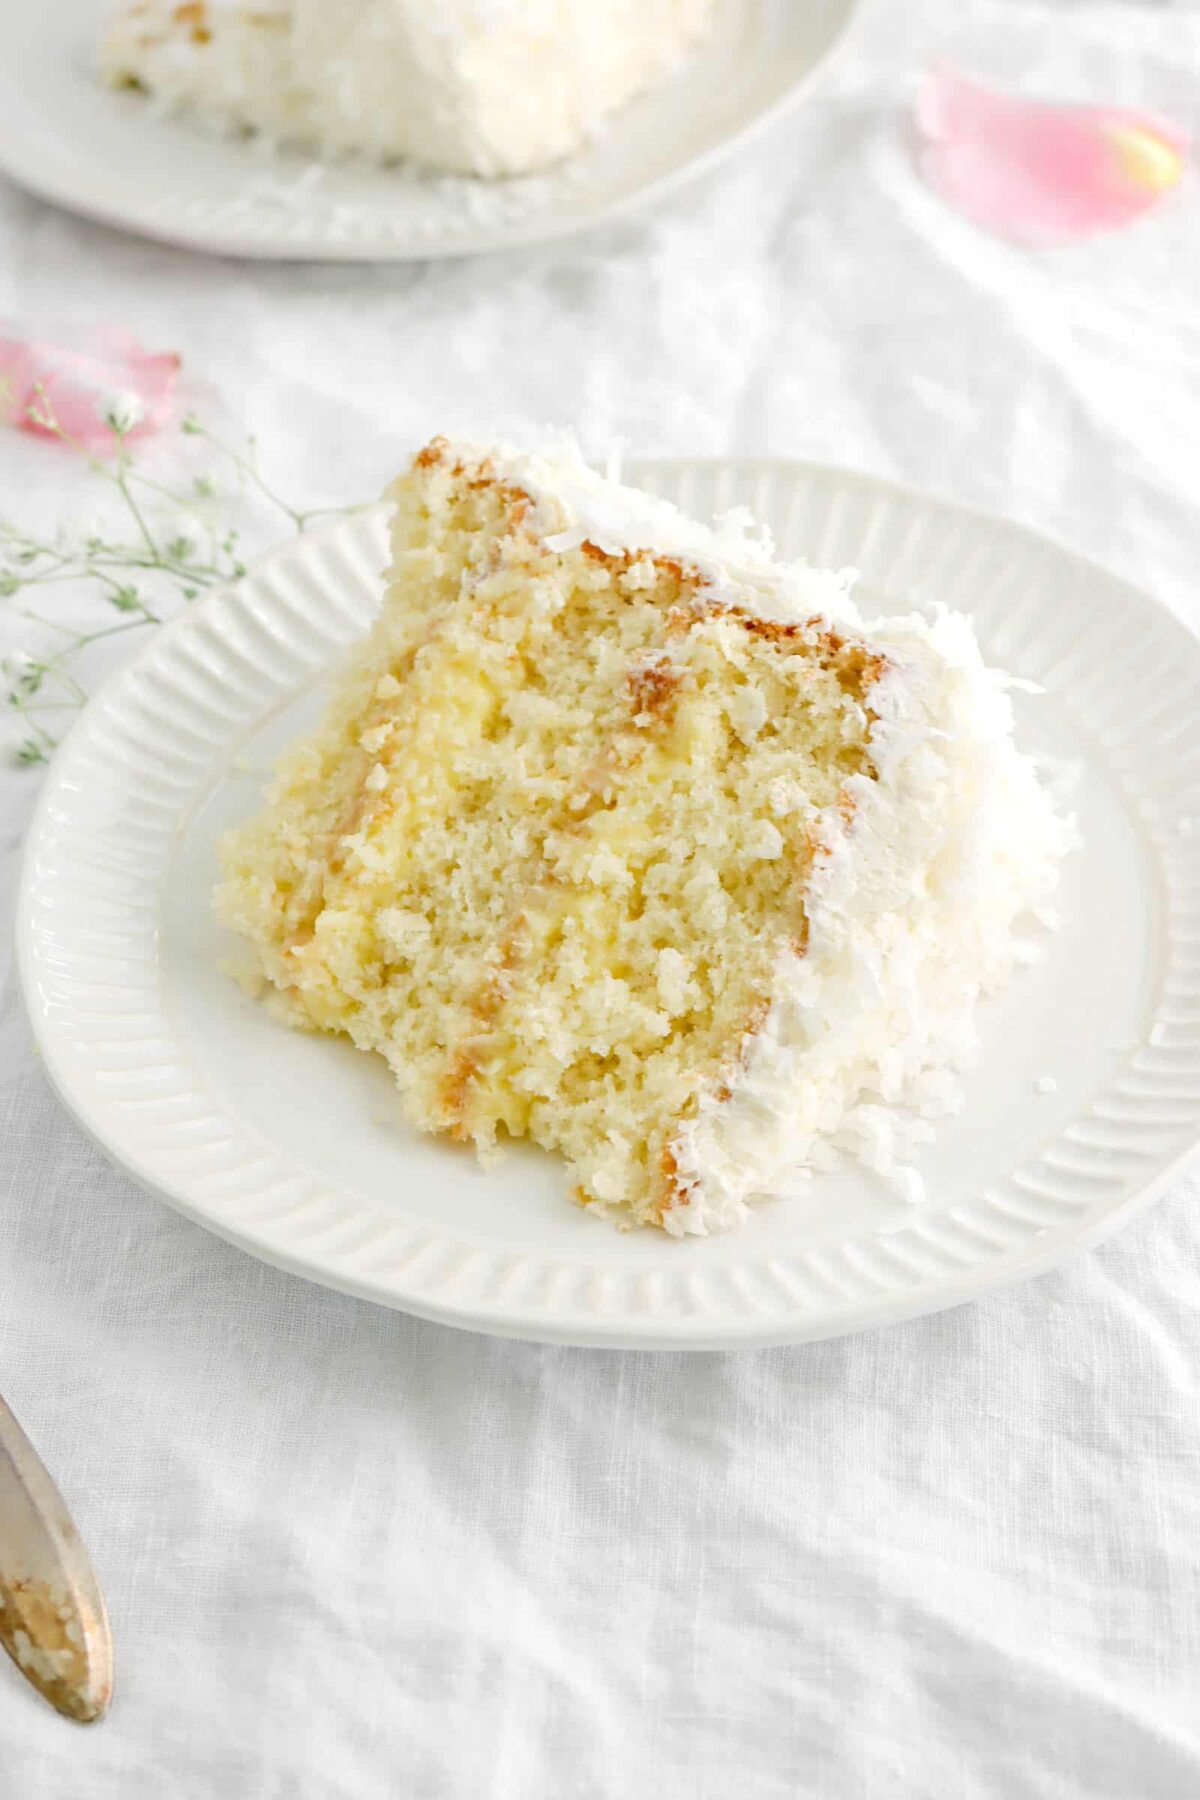 slice of coconut cake on white plate